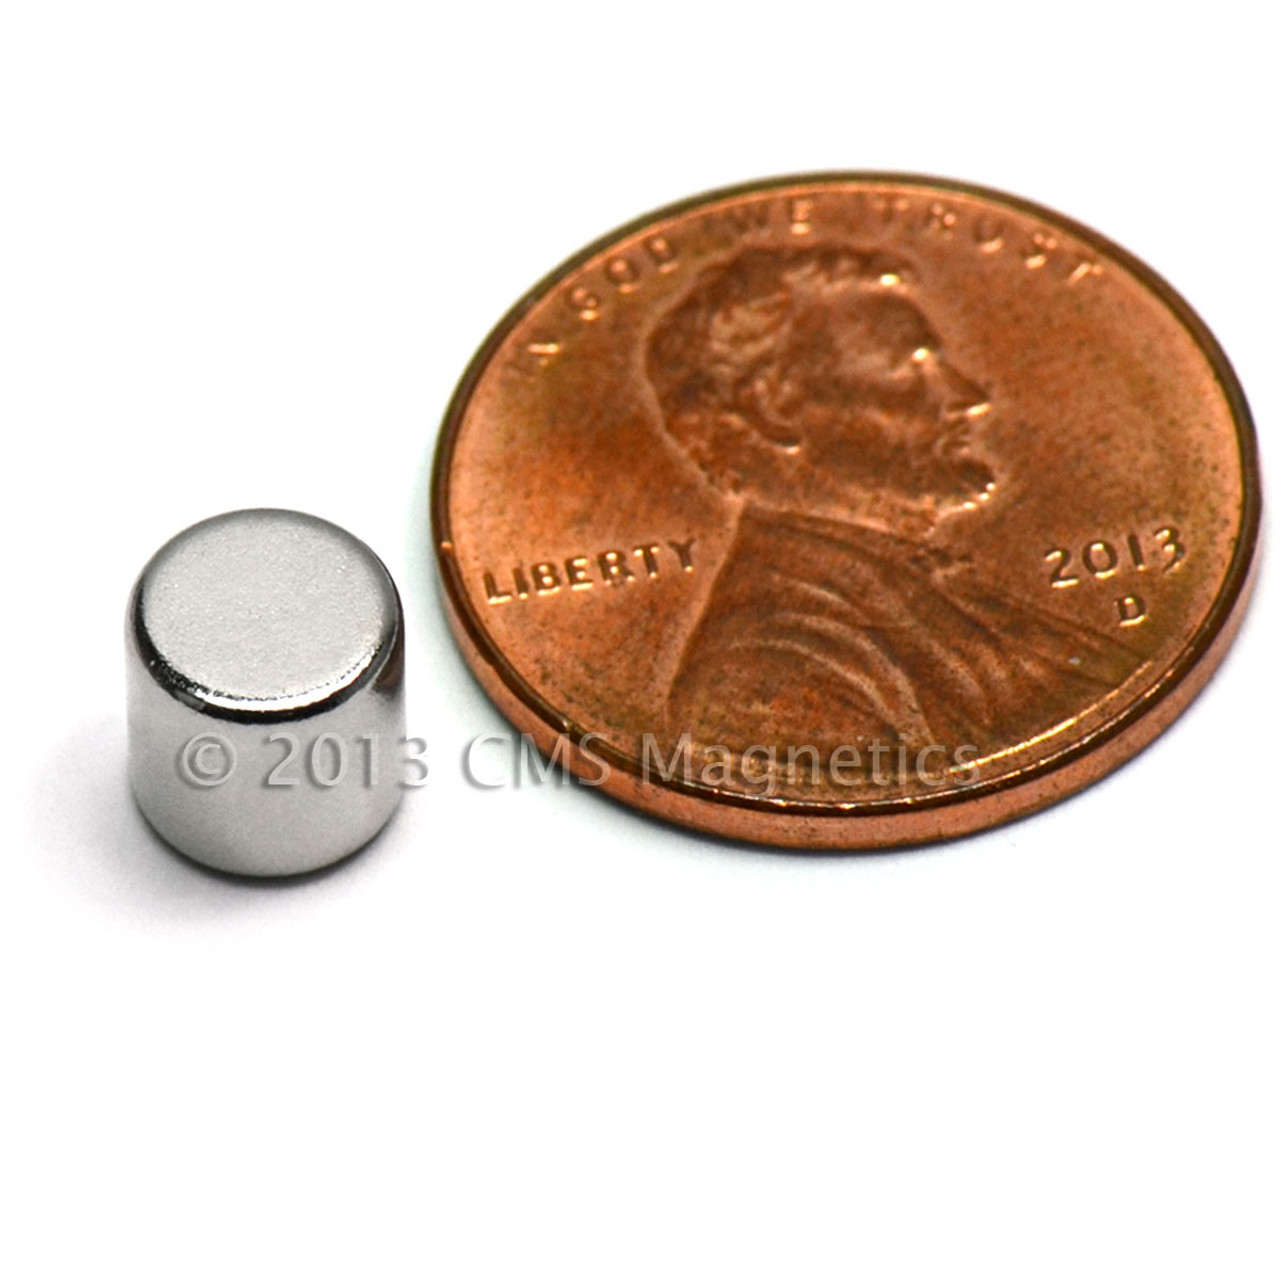 Neodymium  Disc Magnets N52 Neodymium Cylindrical Magnet 1/4"x1/4" Rare Earth Cylinder Magnets